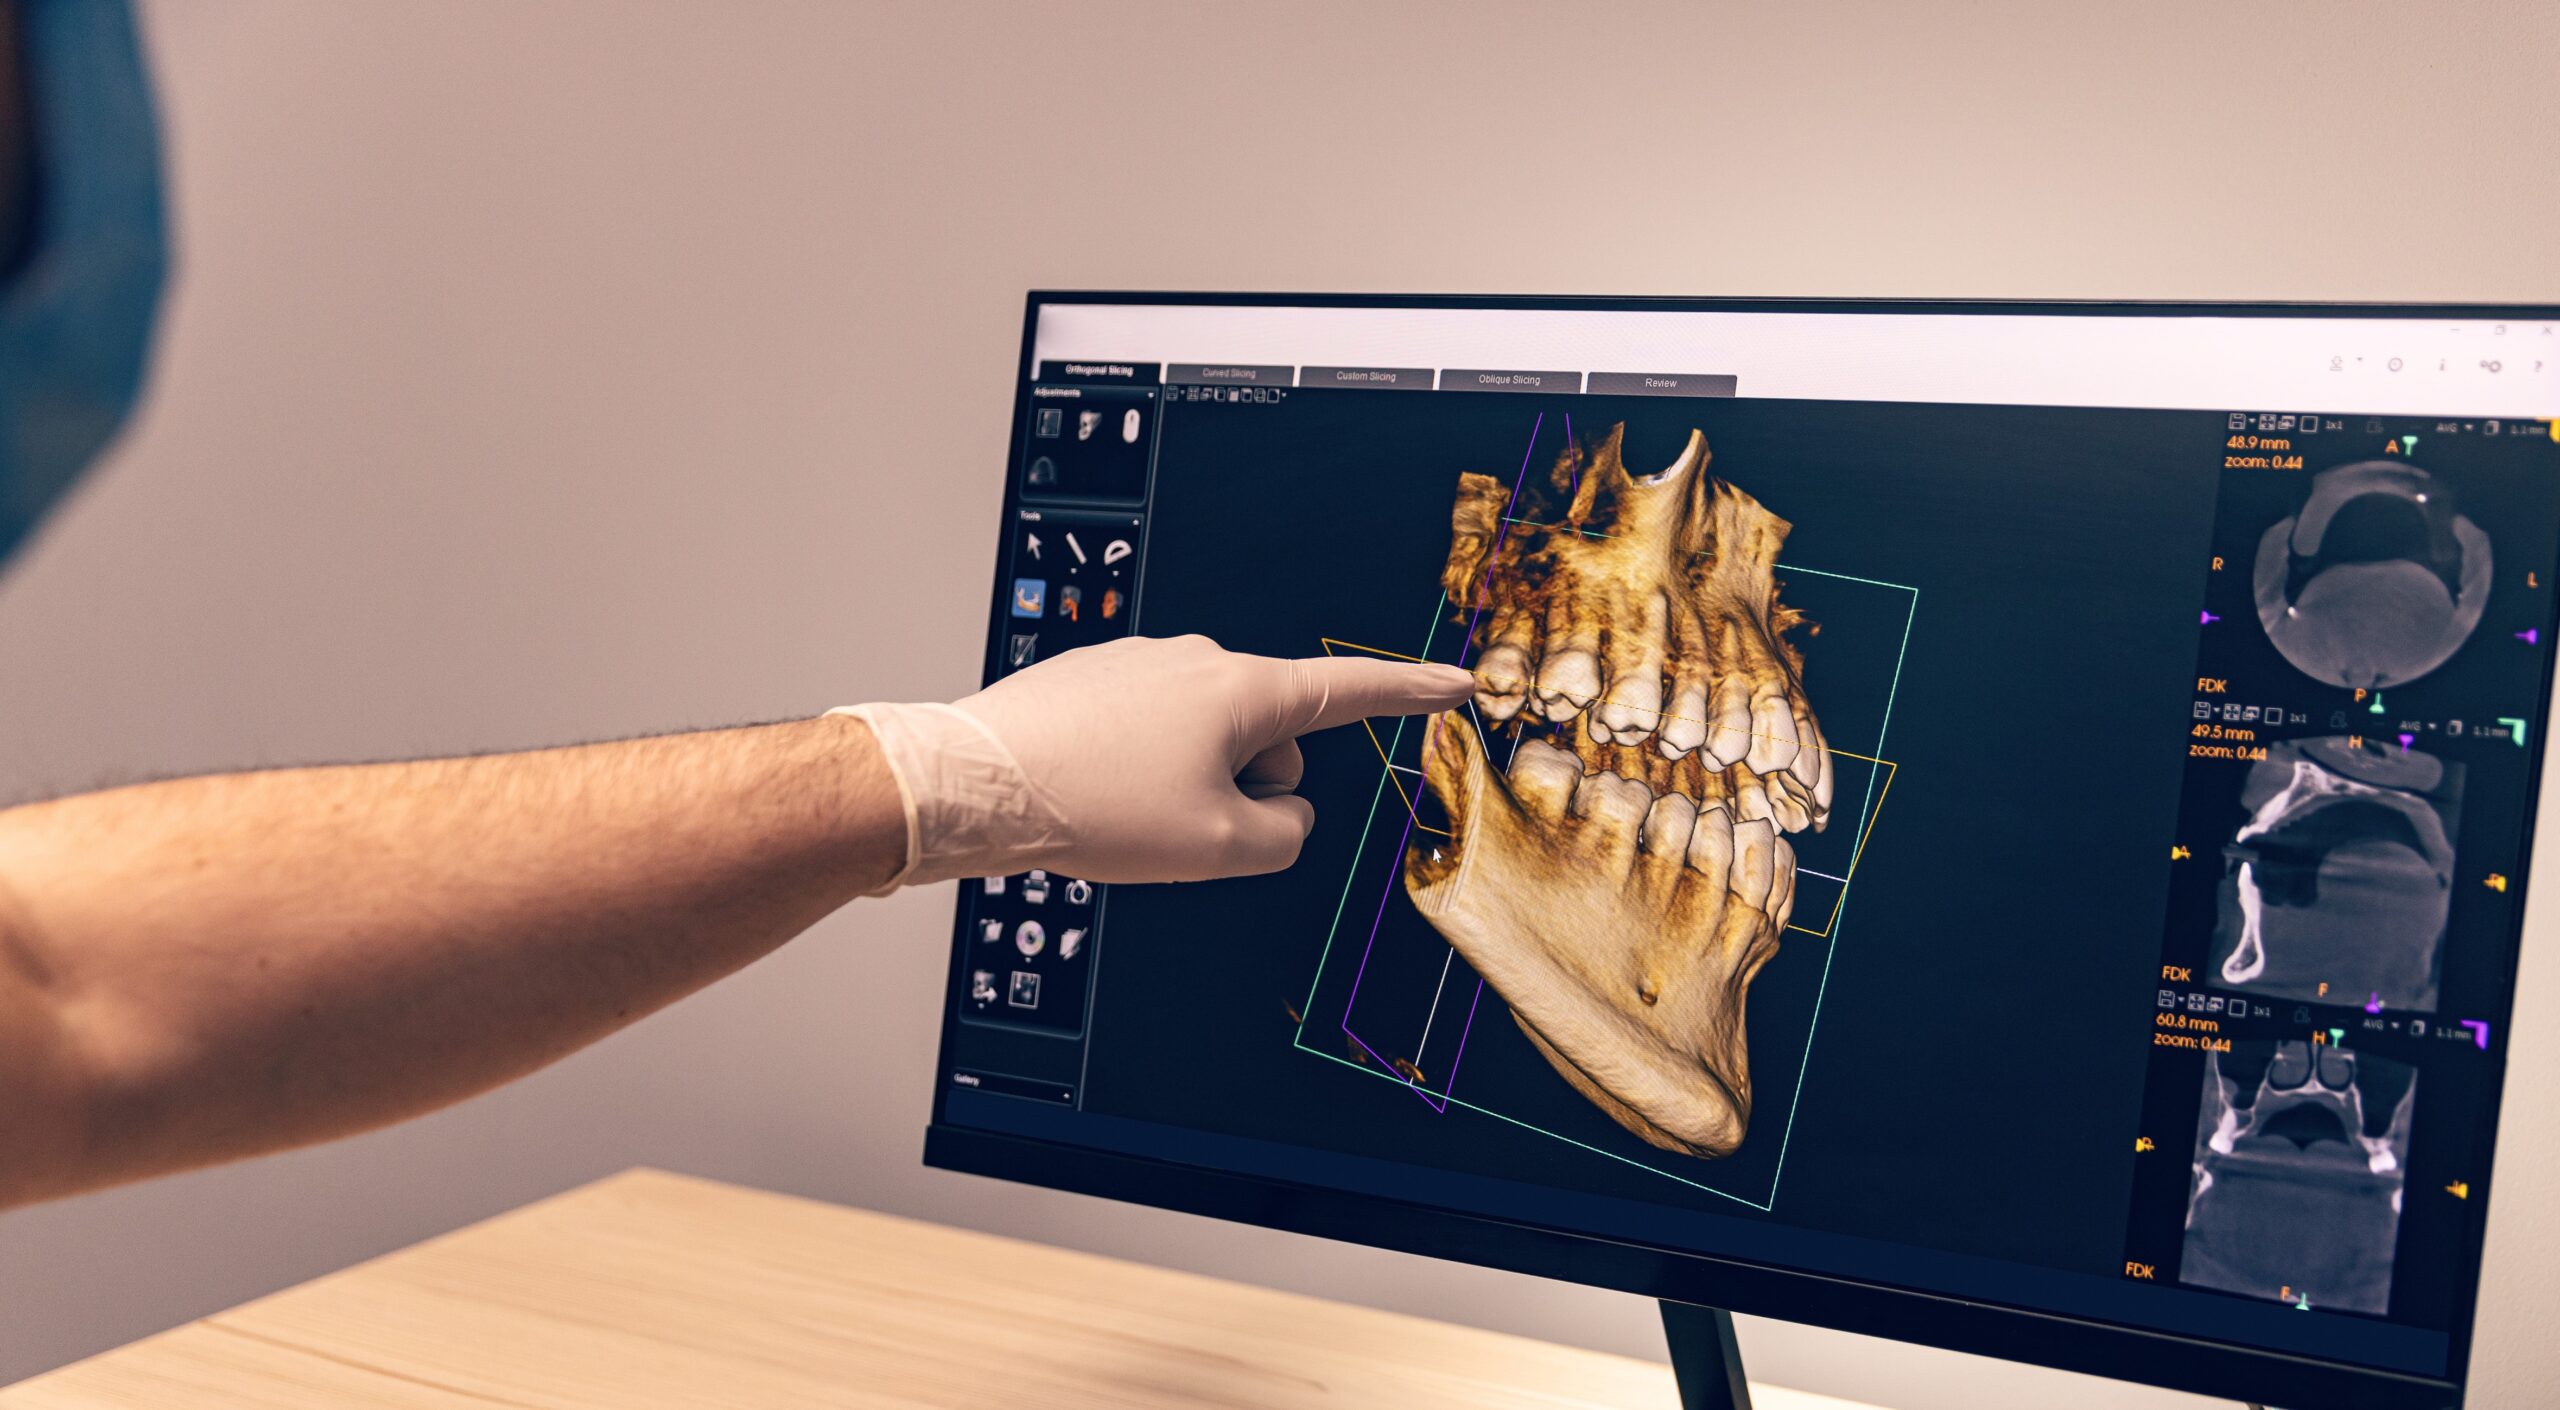 Dental cone-beam computed tomography (CBCT) combined course 3D Scanning